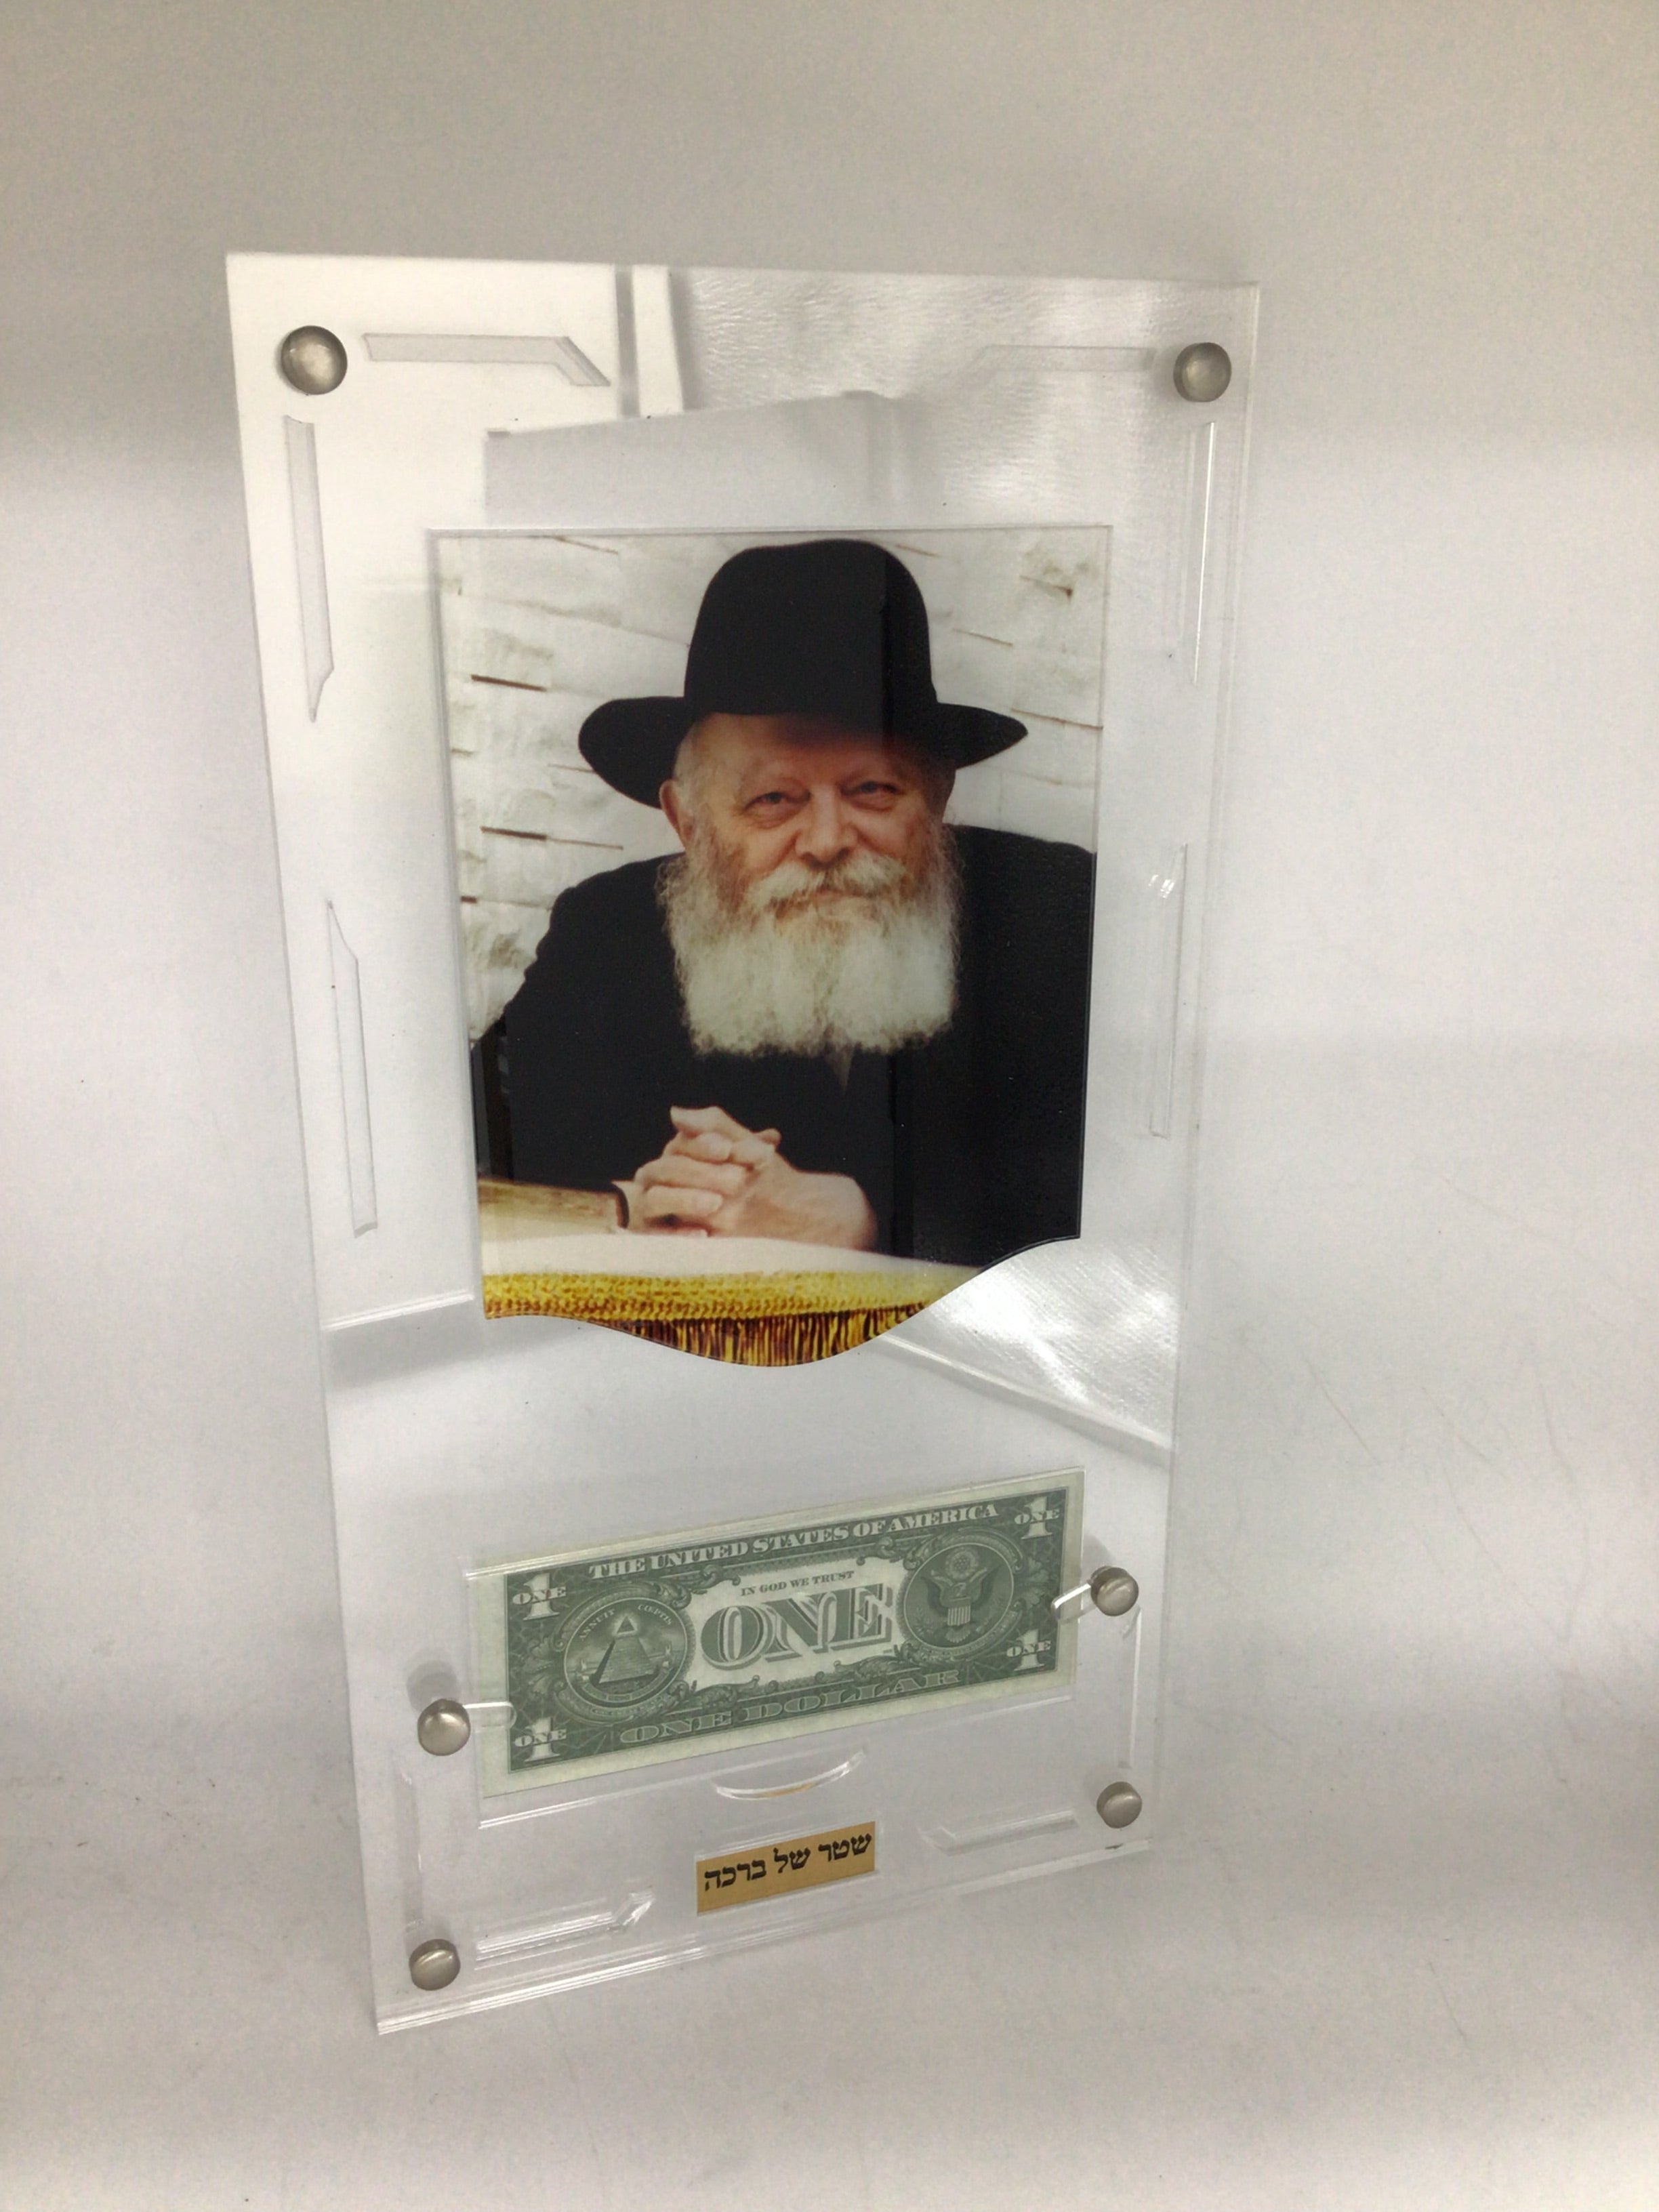 Lucite Print of the Lubavitcher Rebbe, with Dollar